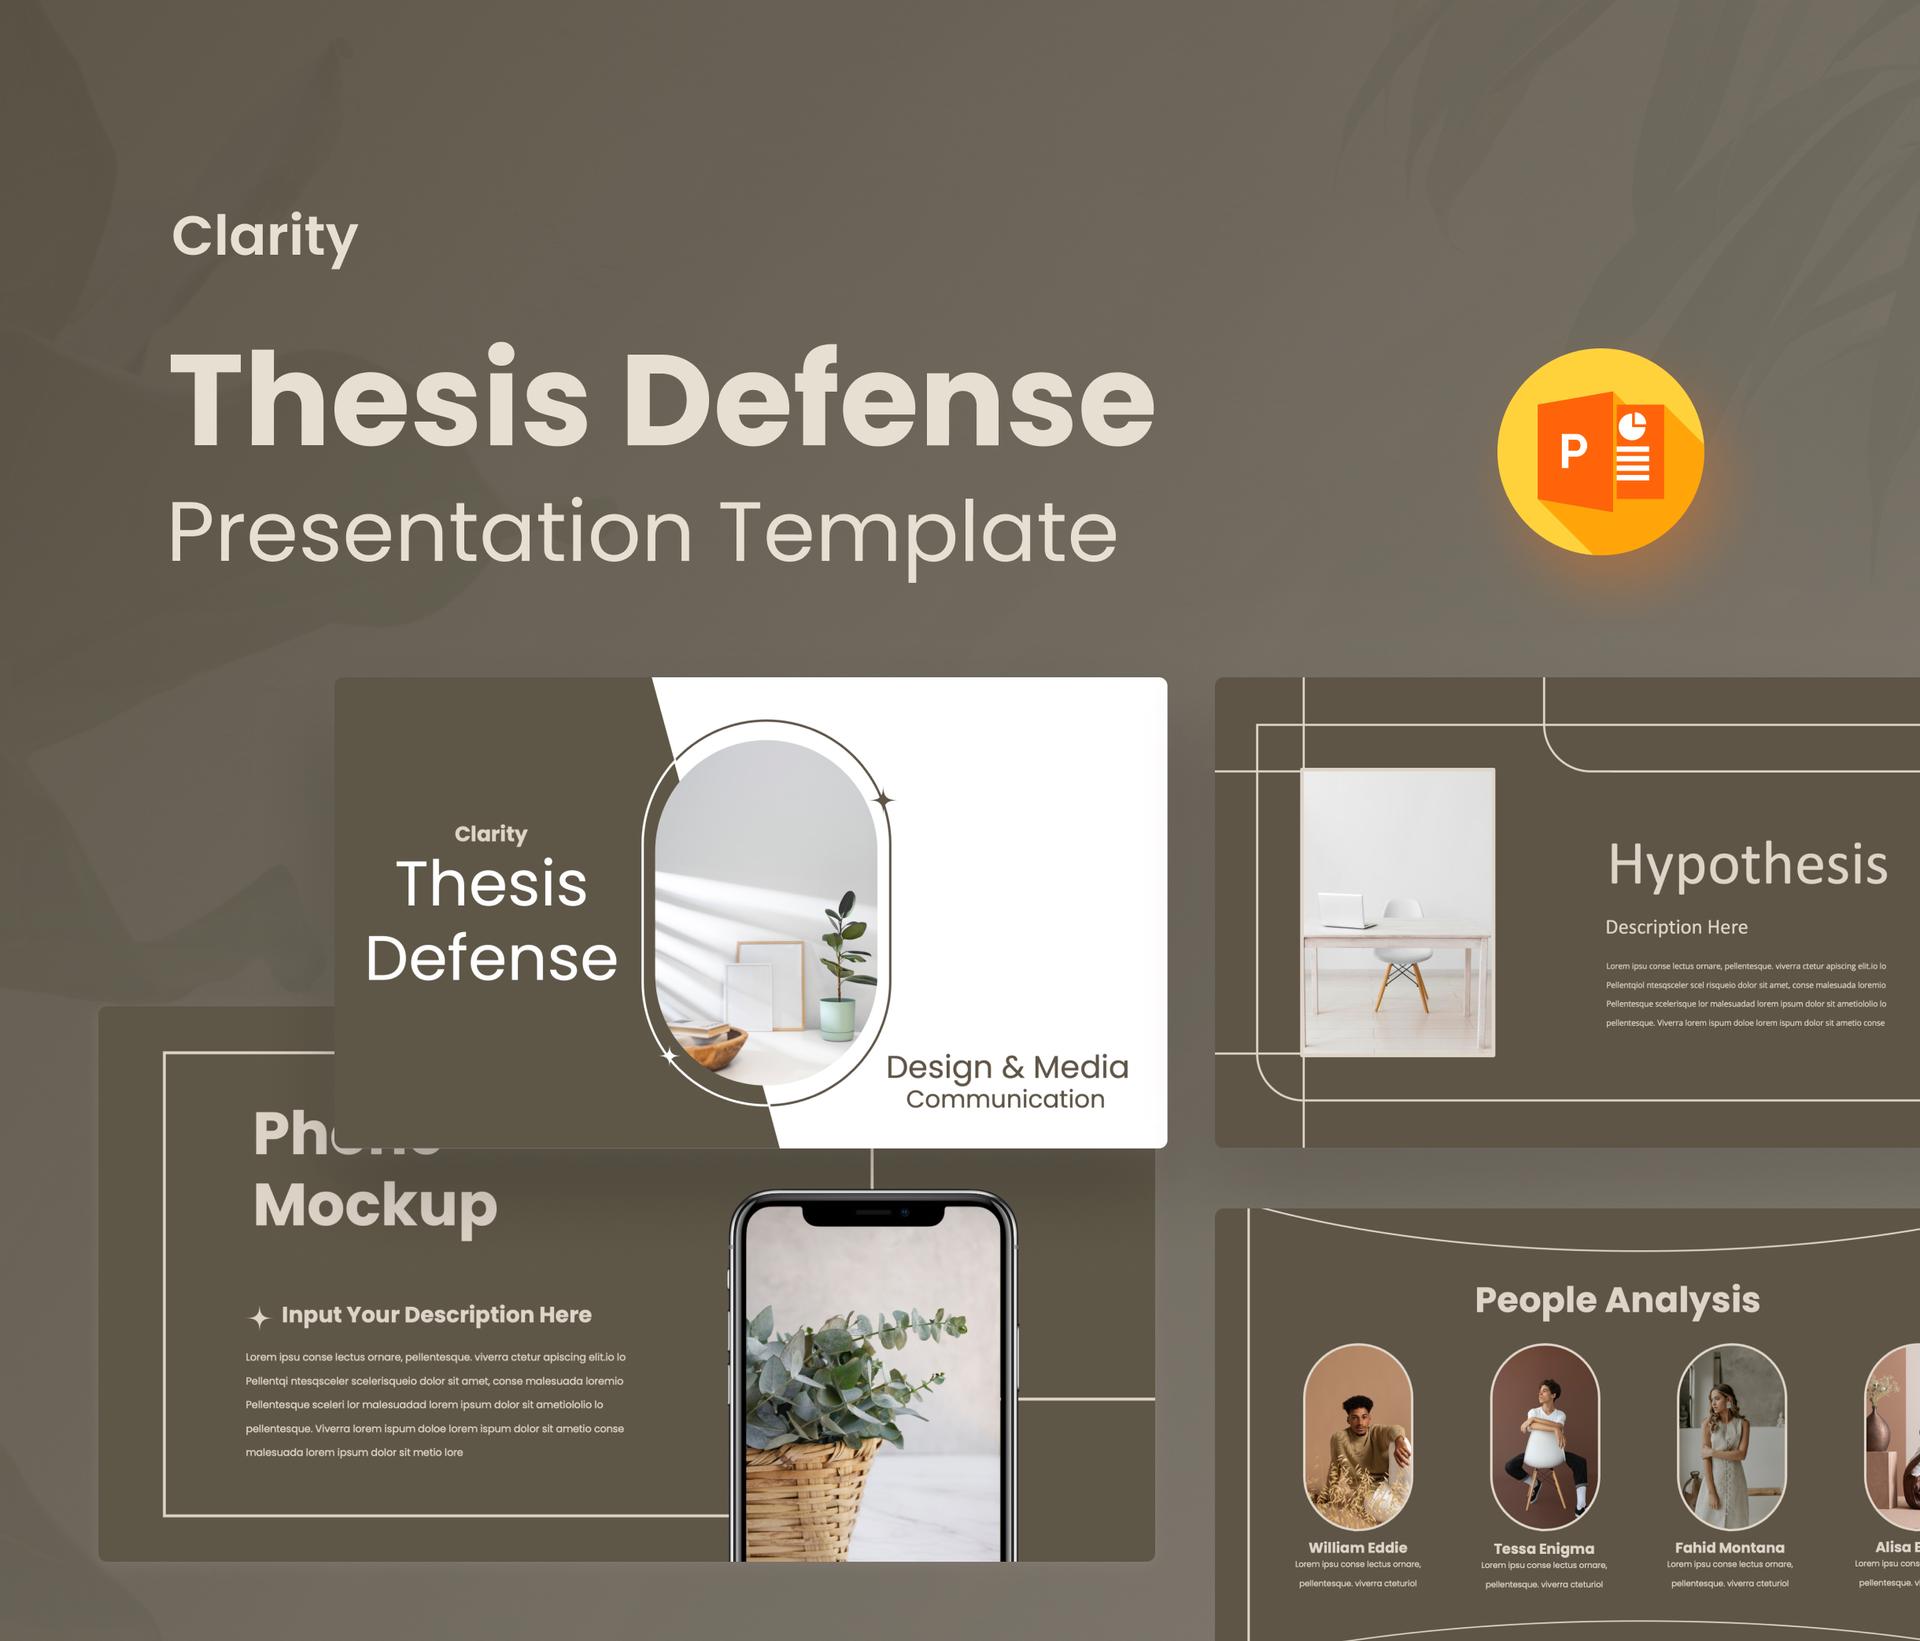 Clarity - Thesis Defense Presentation Template.